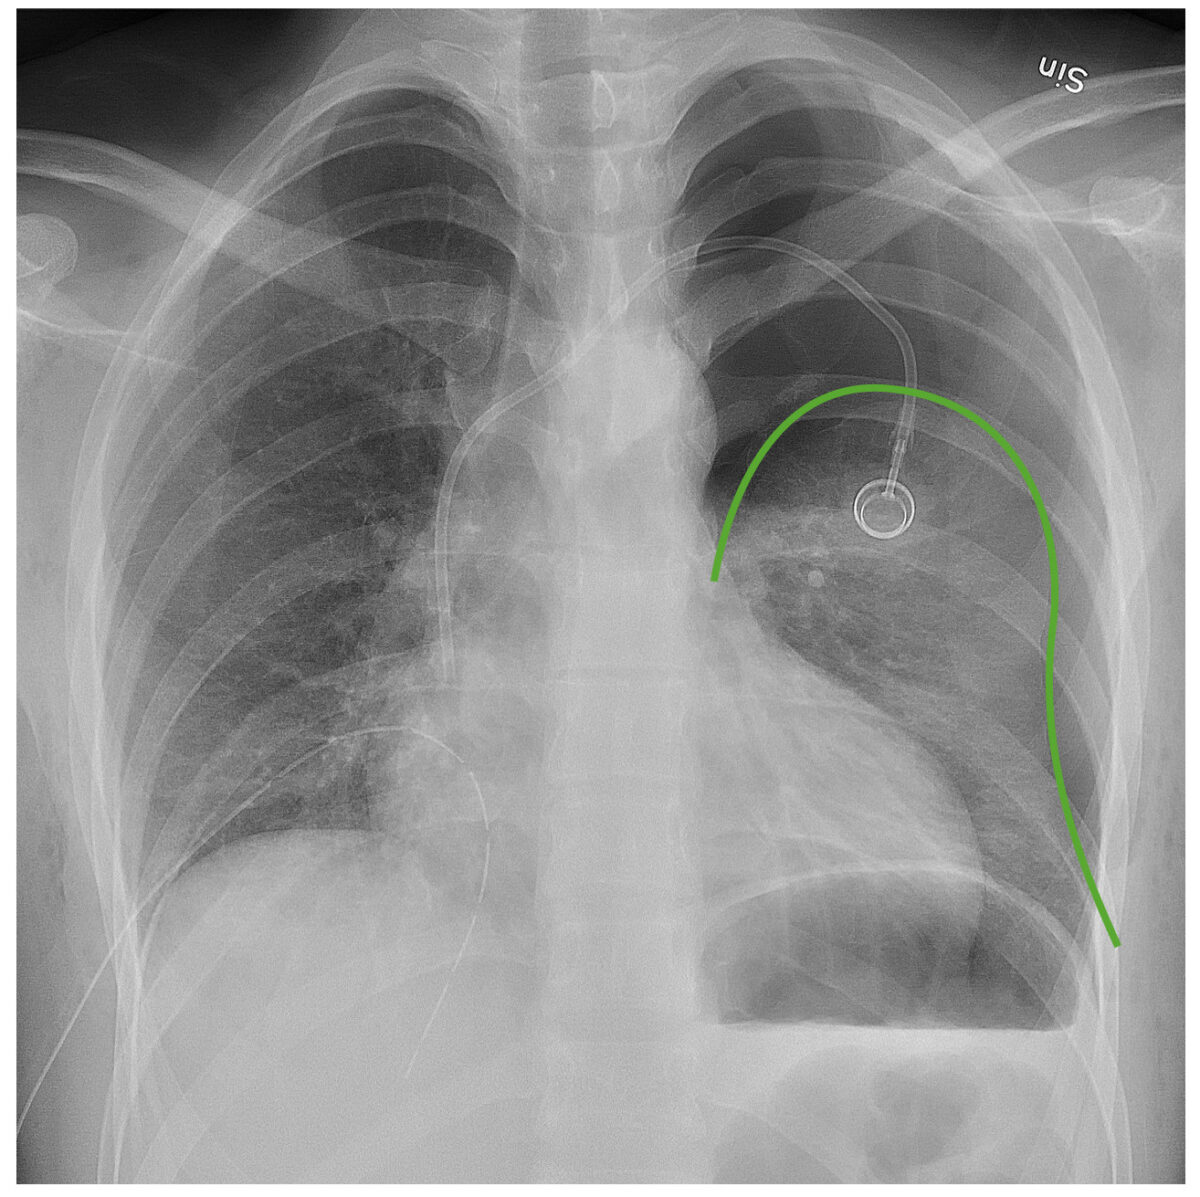 Chest x-ray showing left pneumothorax